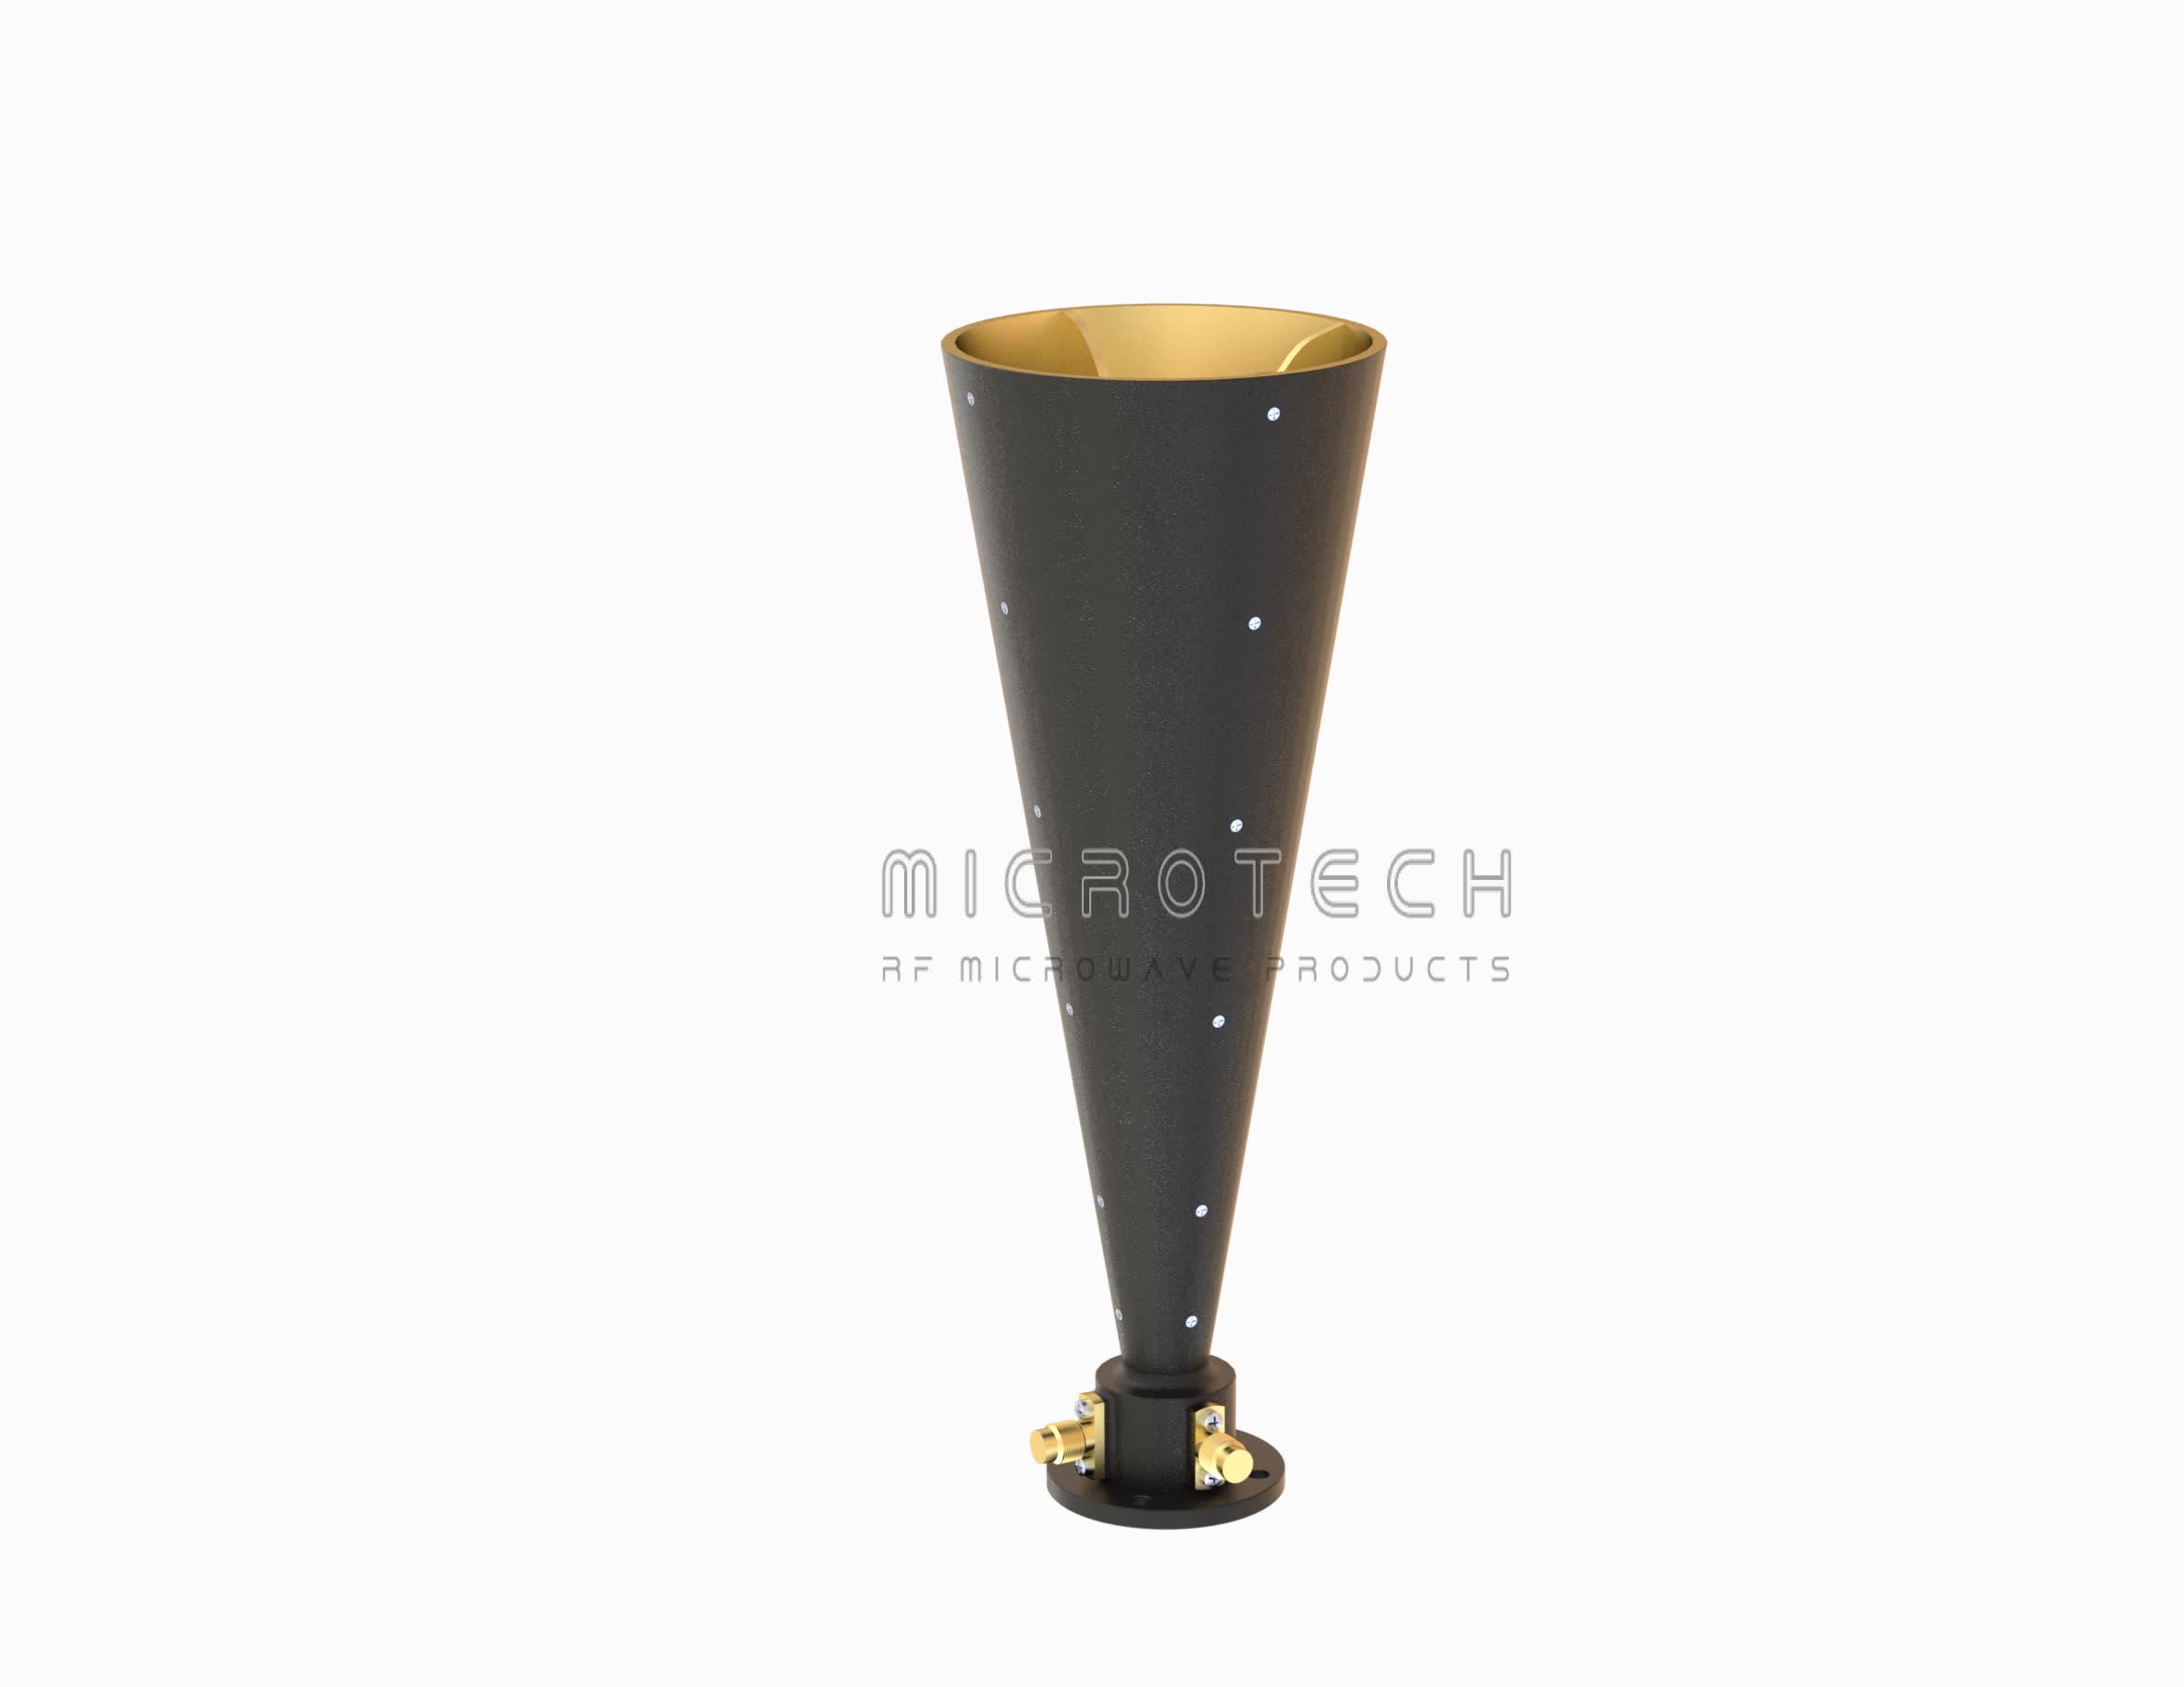 Conical Dual Polarized Horn Antenna 20 dBi Typ. Gain, 23-34 GHz Frequency Range